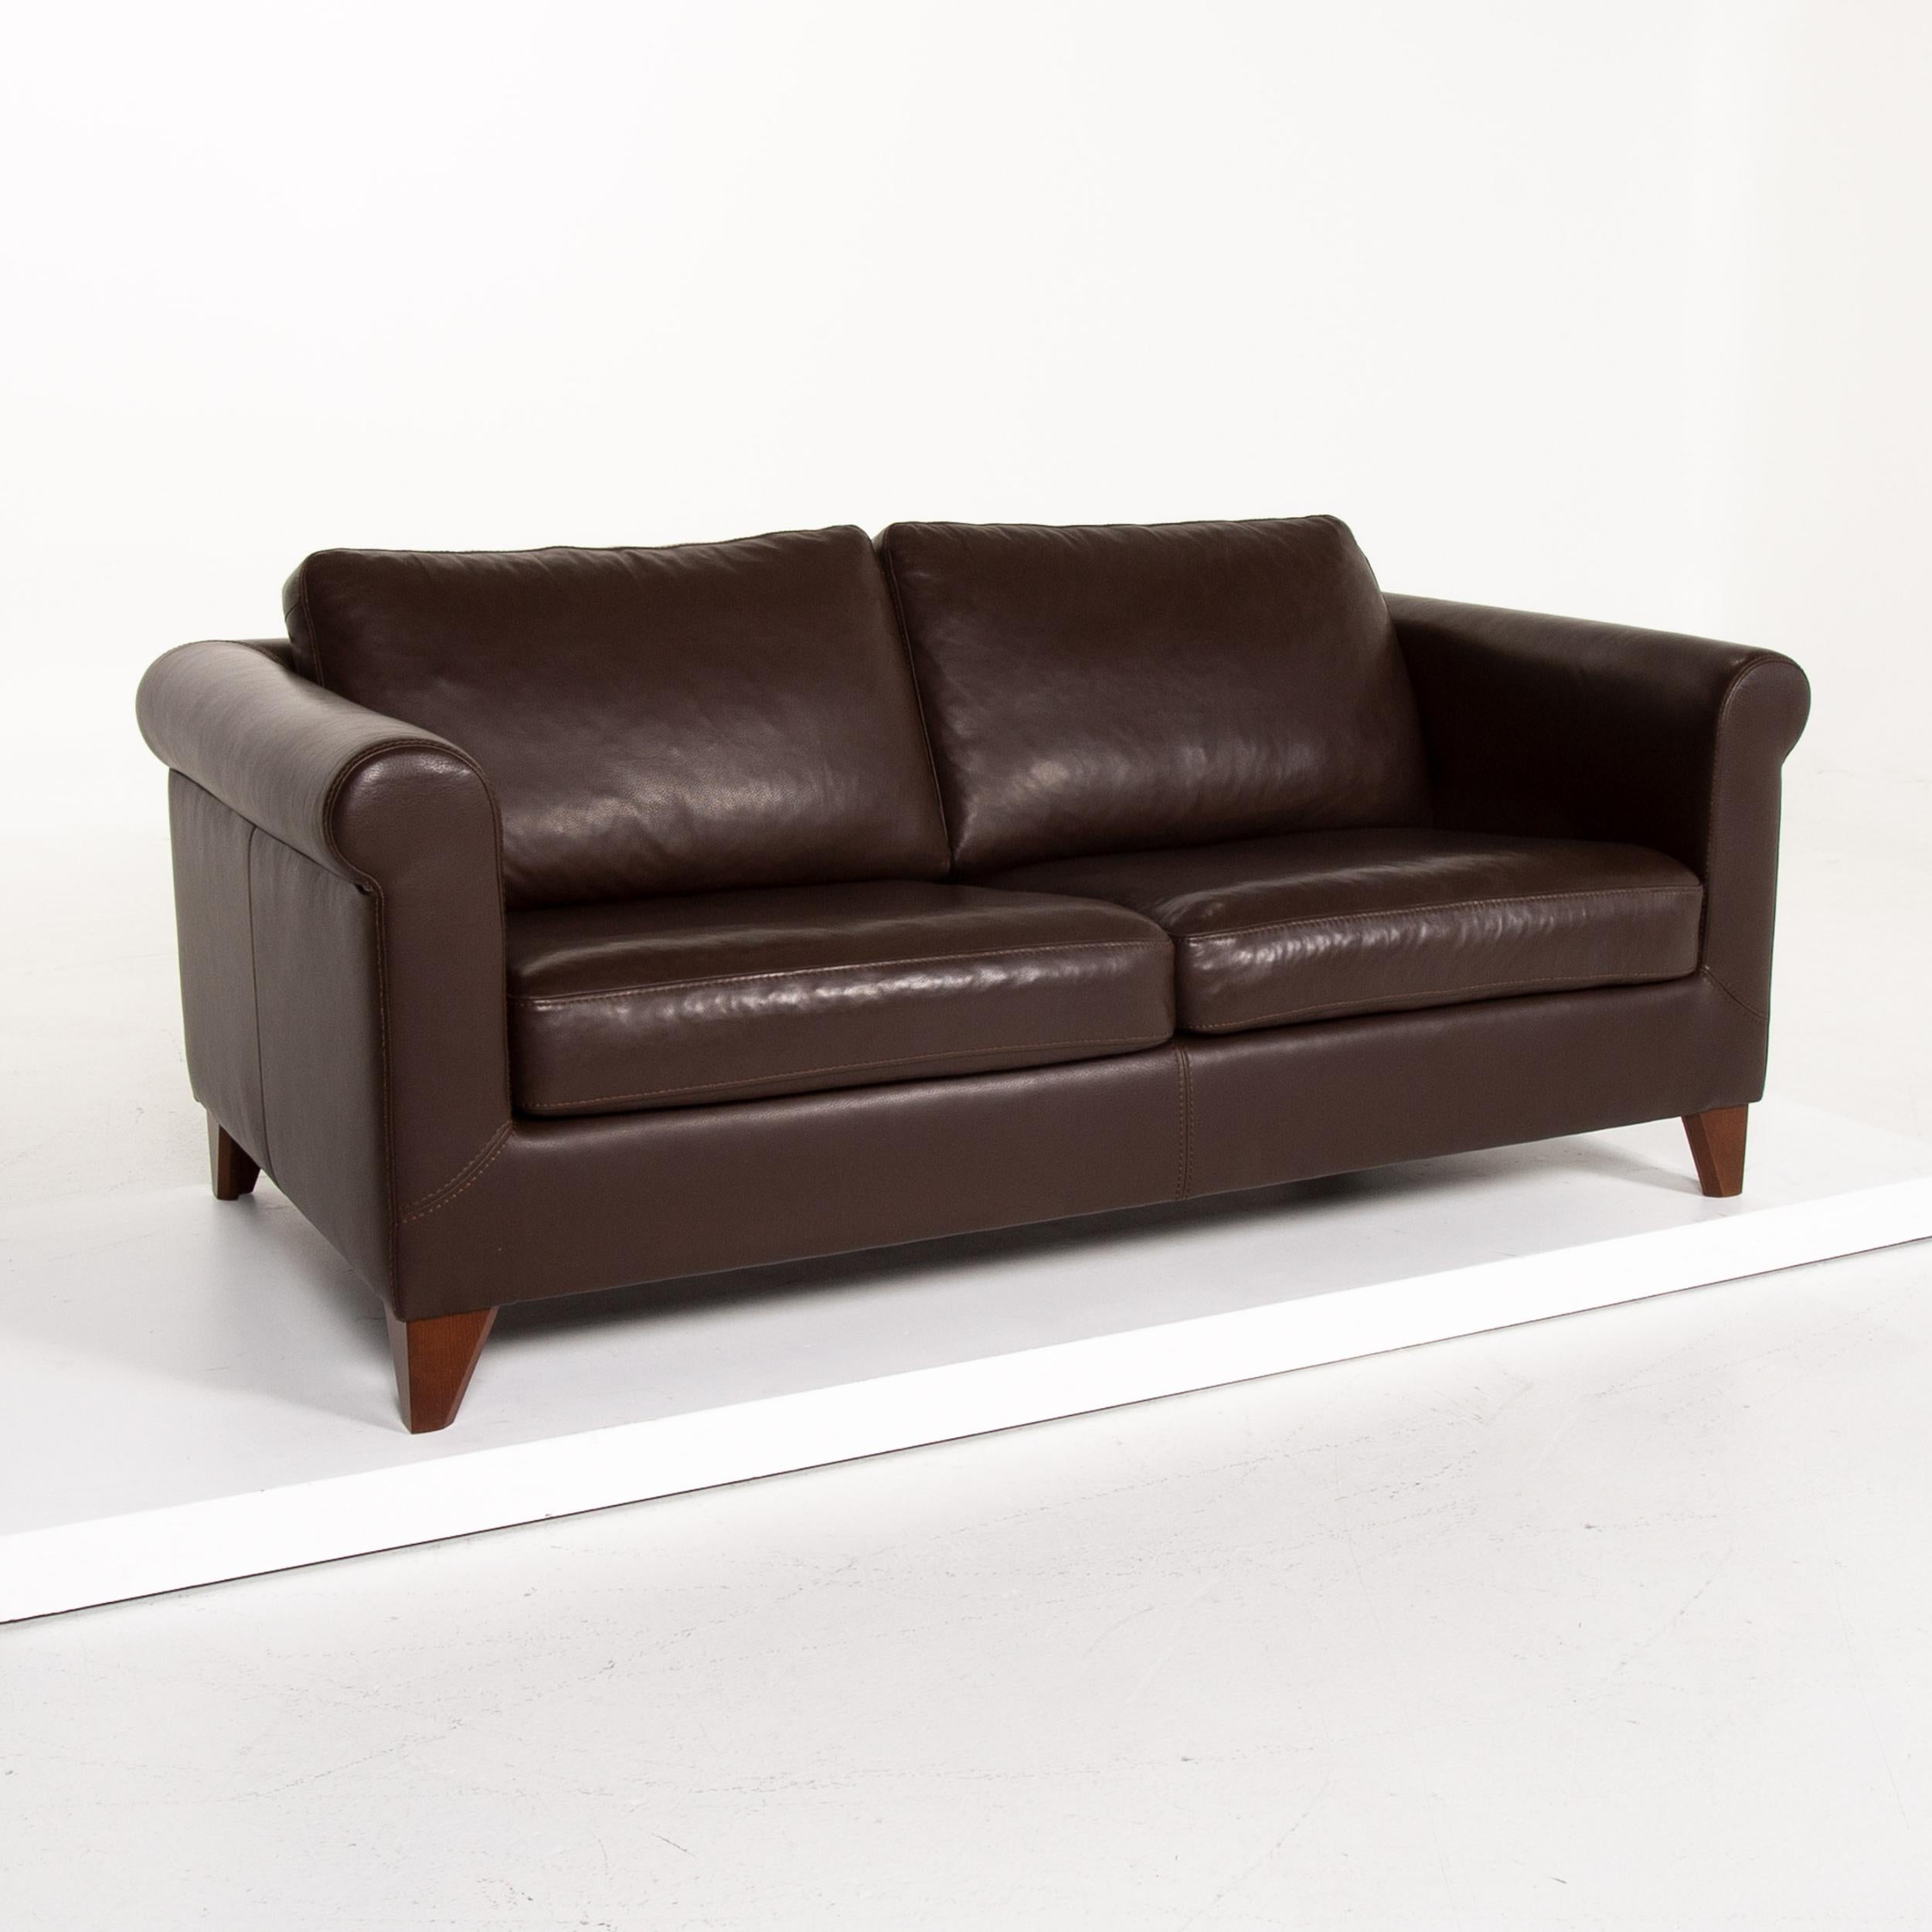 Machalke Amadeo Leather Sofa Dark Brown Brown Three-Seat Couch For Sale 1